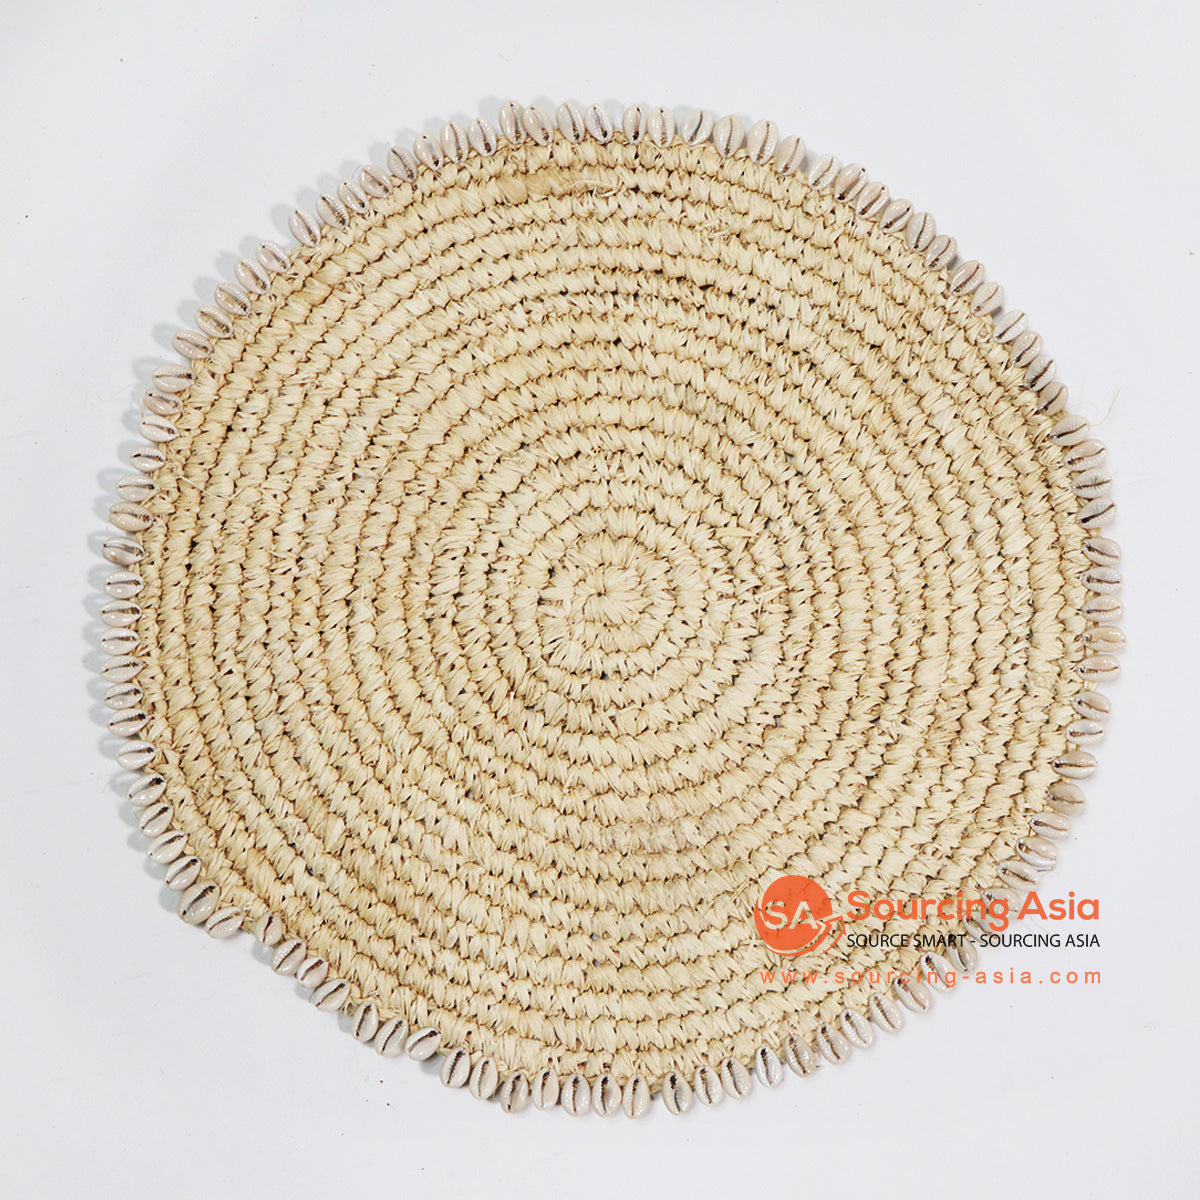 HBSC011-1 CREAM RAFFIA ROUND PLACEMAT WITH SHELL